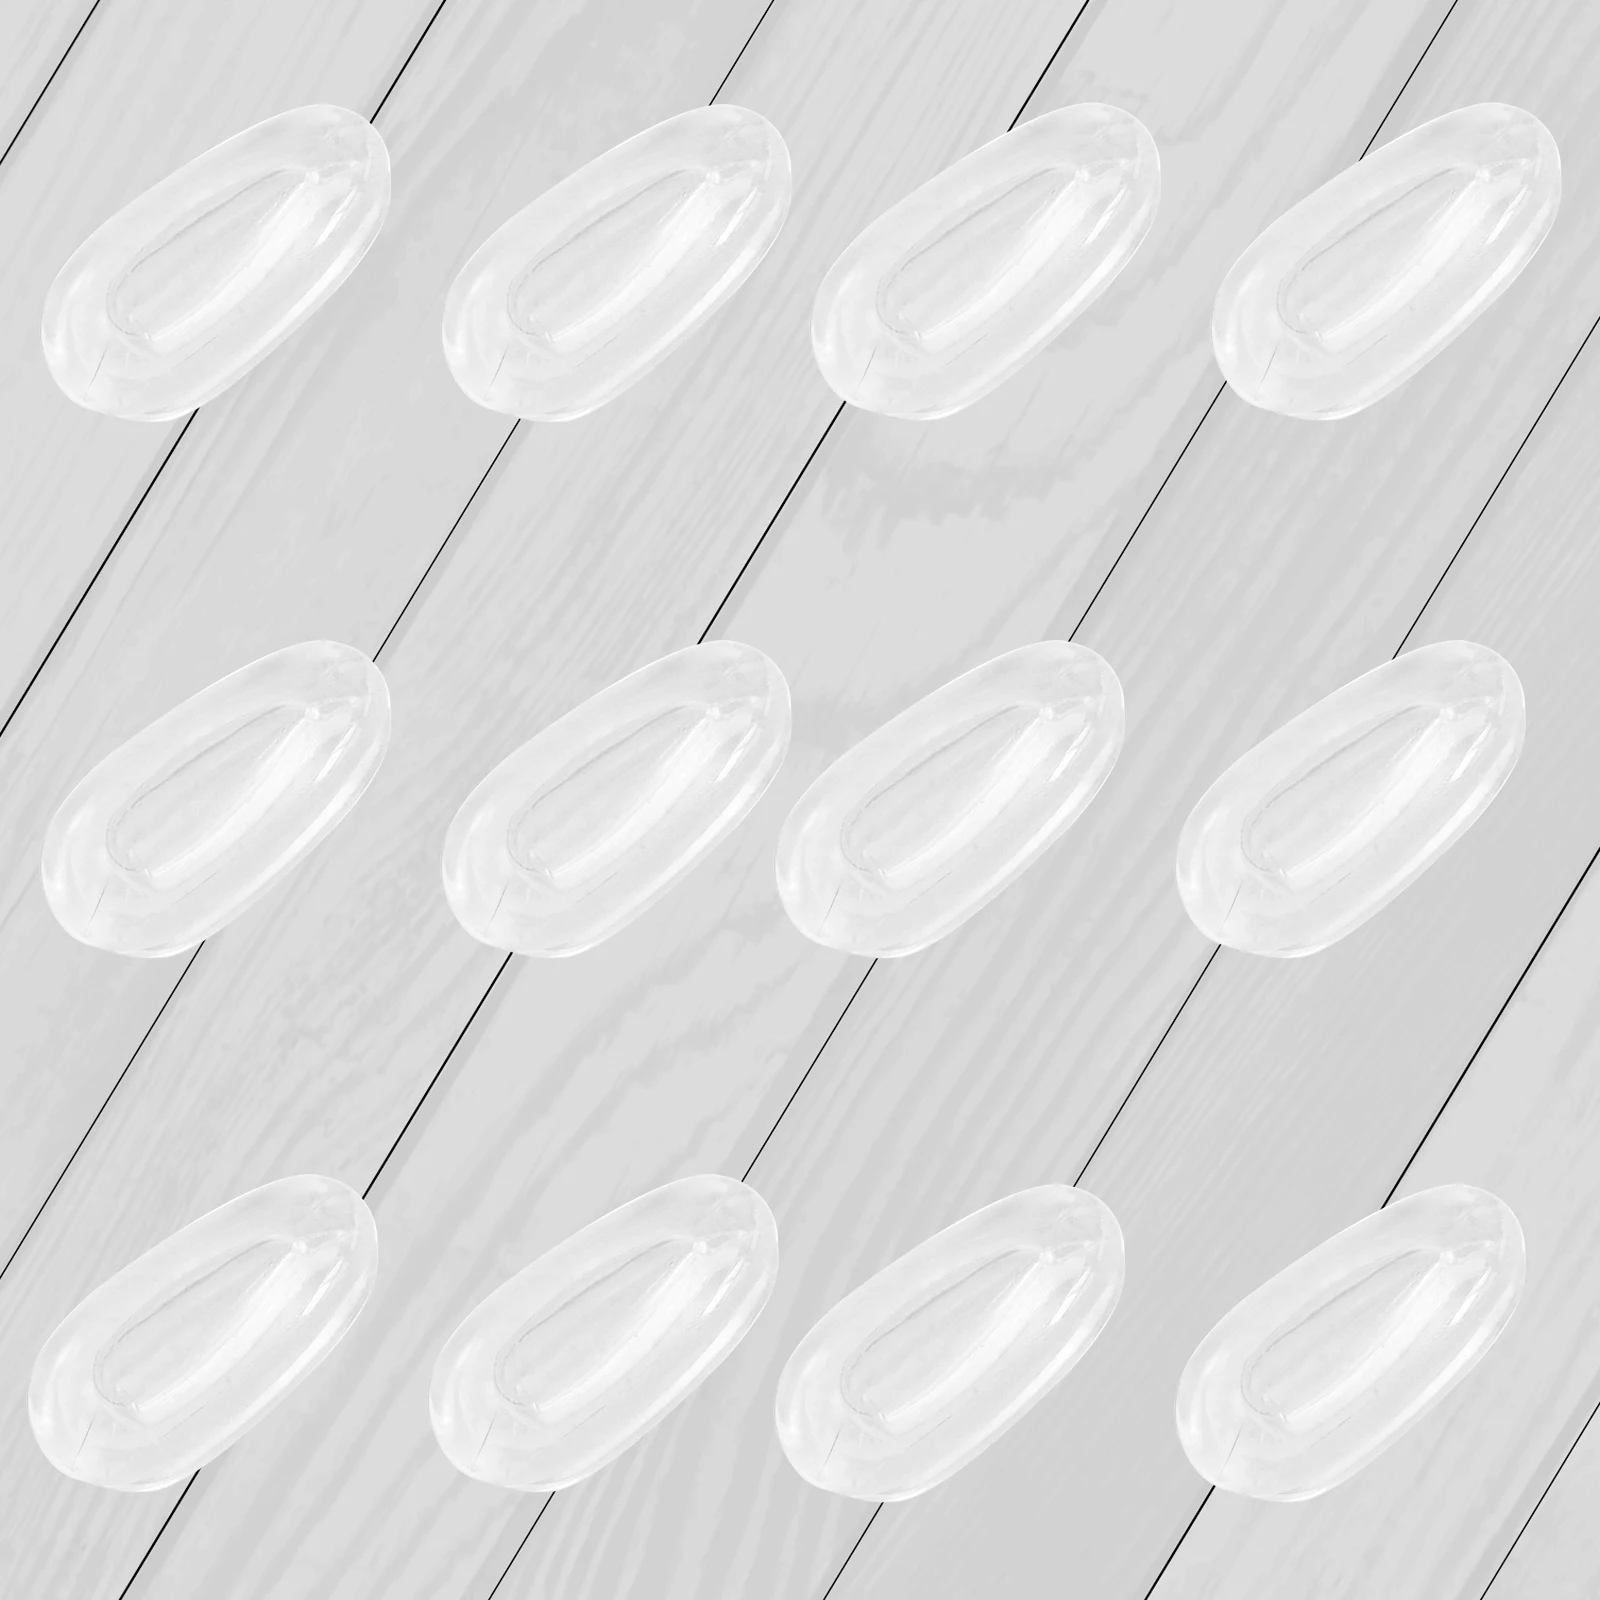 E.O.S Silicon Rubber Replacement Clear Nose Pads for OAKLEY Given OO4068 Frame Multi-Options vonxyz replacement clear nose pads for for oakley ponder ox1134 frame varieties